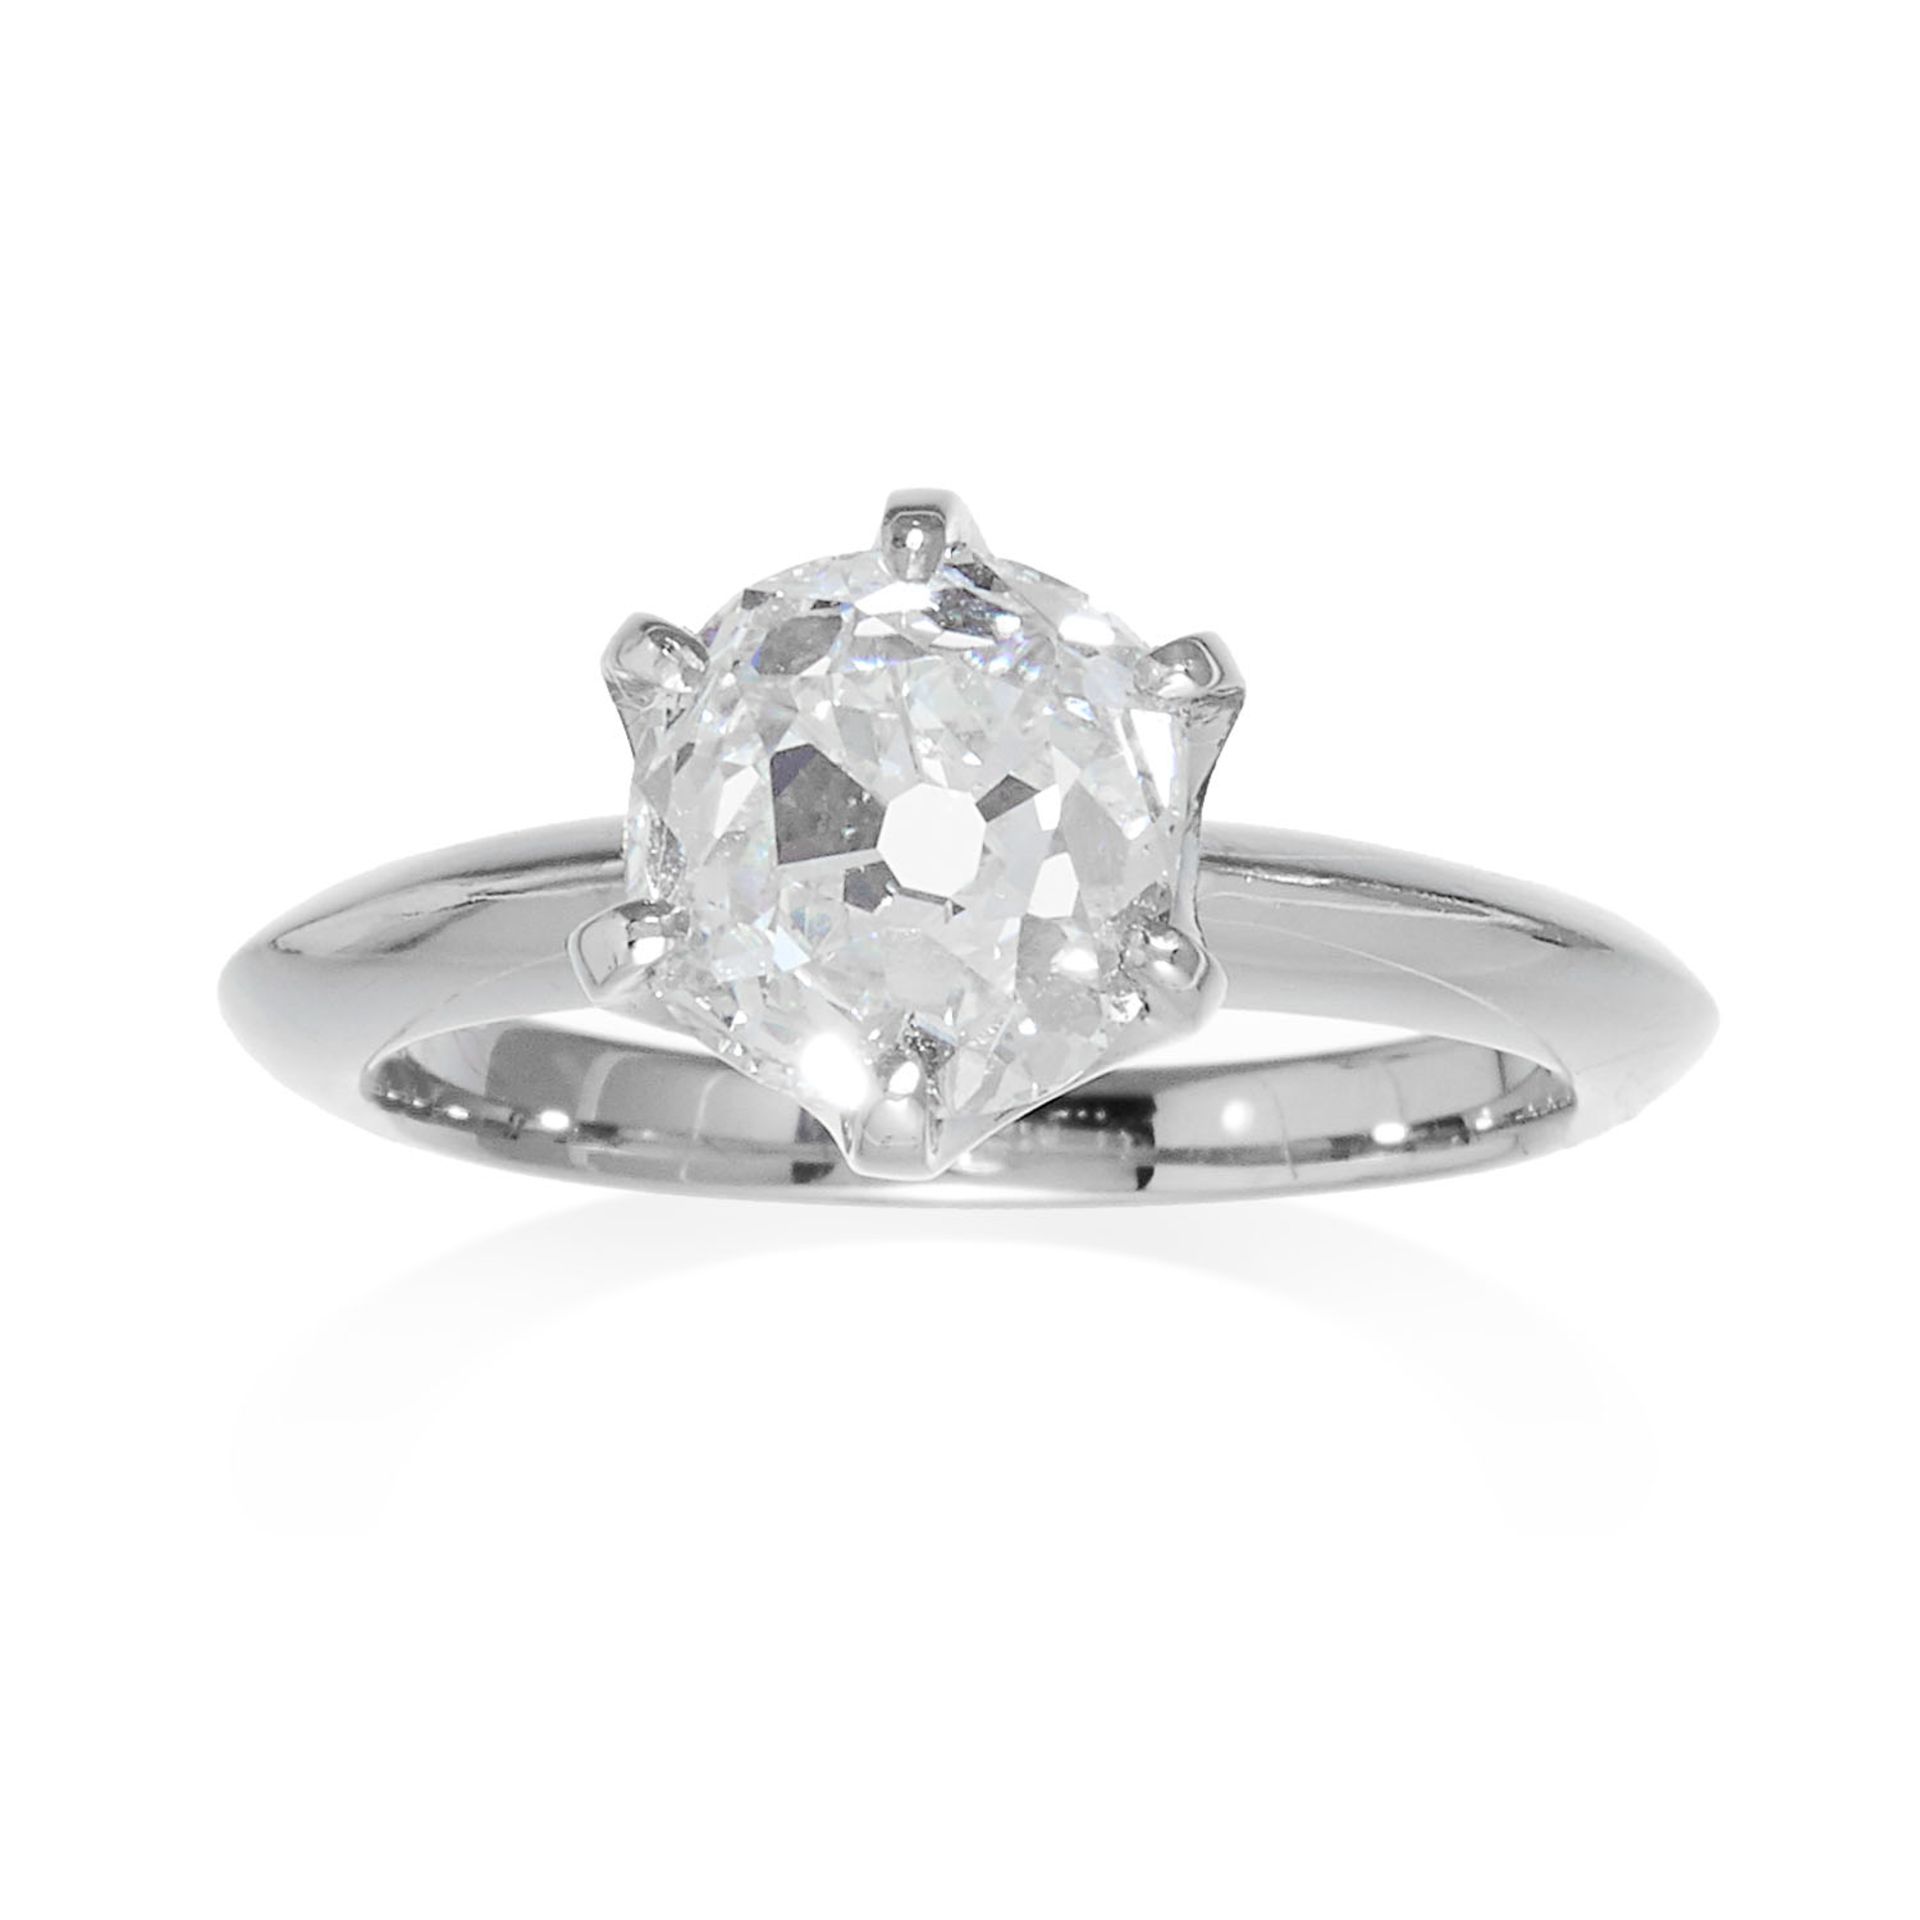 A 3.33 CARAT OLD CUT DIAMOND SOLITAIRE RING in platinum, set with an old cut diamond totalling